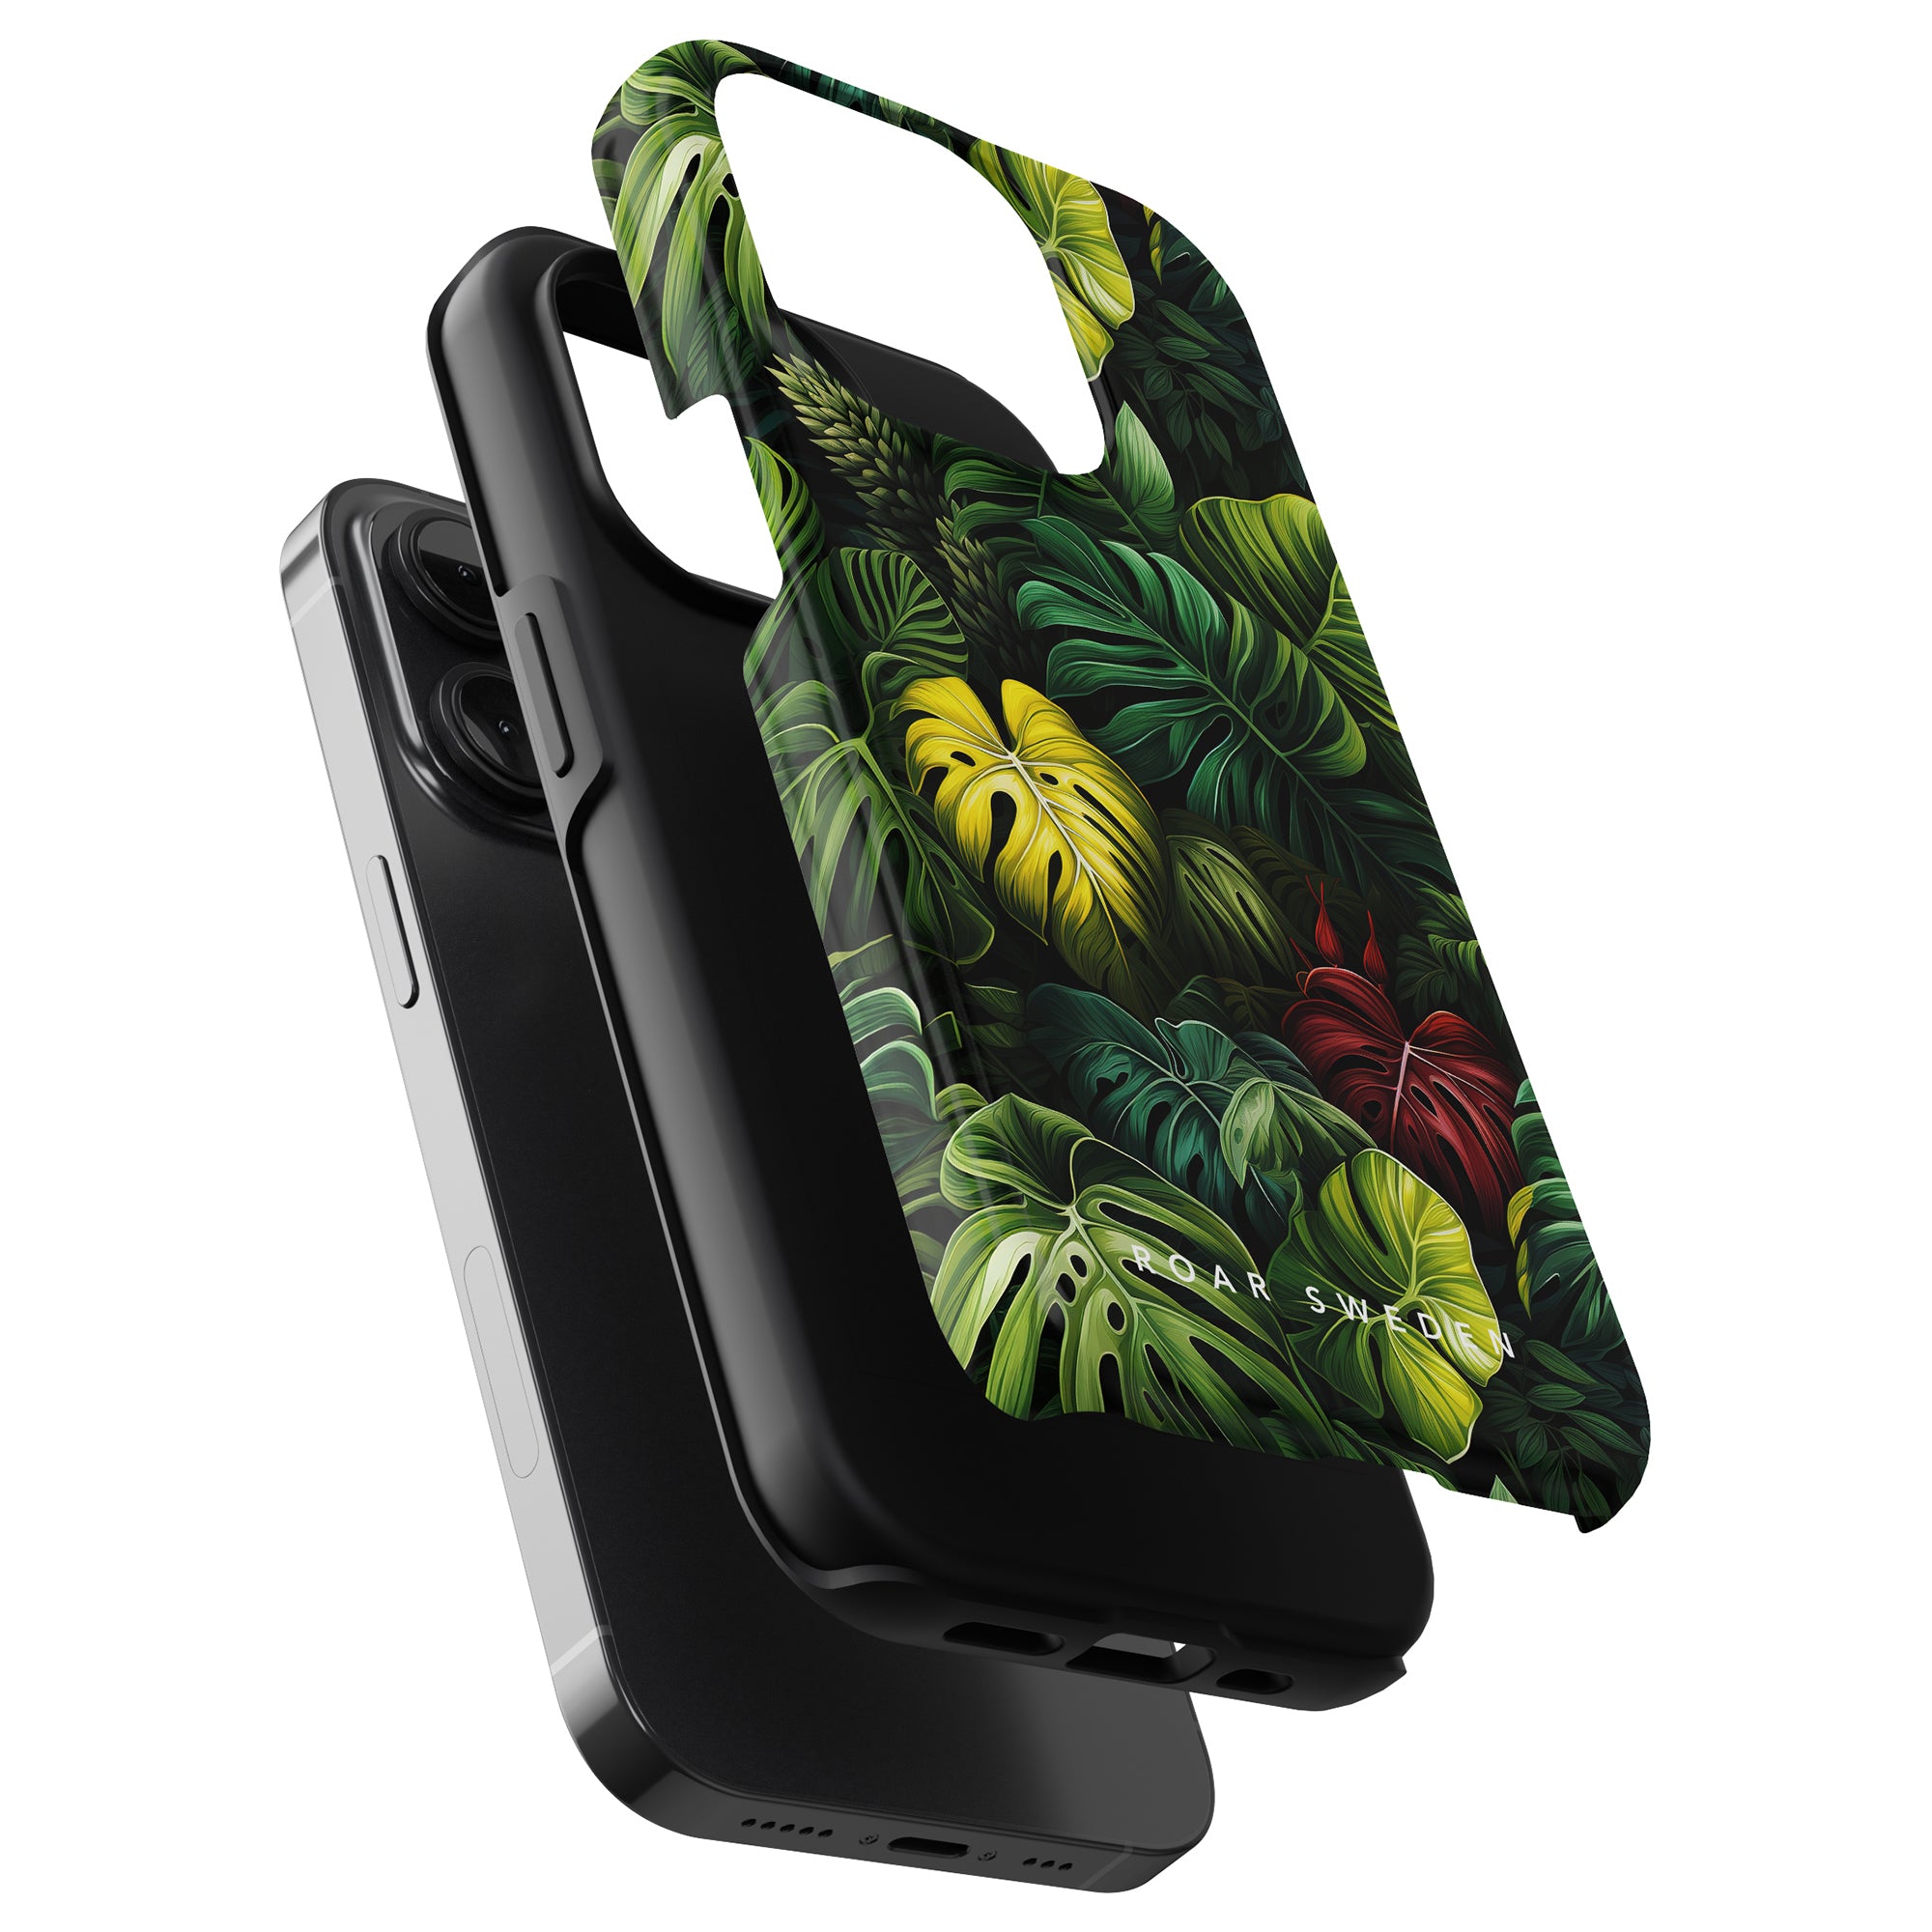 A smartphone with a black protective case and a second case from the Deliciosa - Tough Case collection featuring a leafy green and yellow tropical design, both detached and partially lifted off the phone.